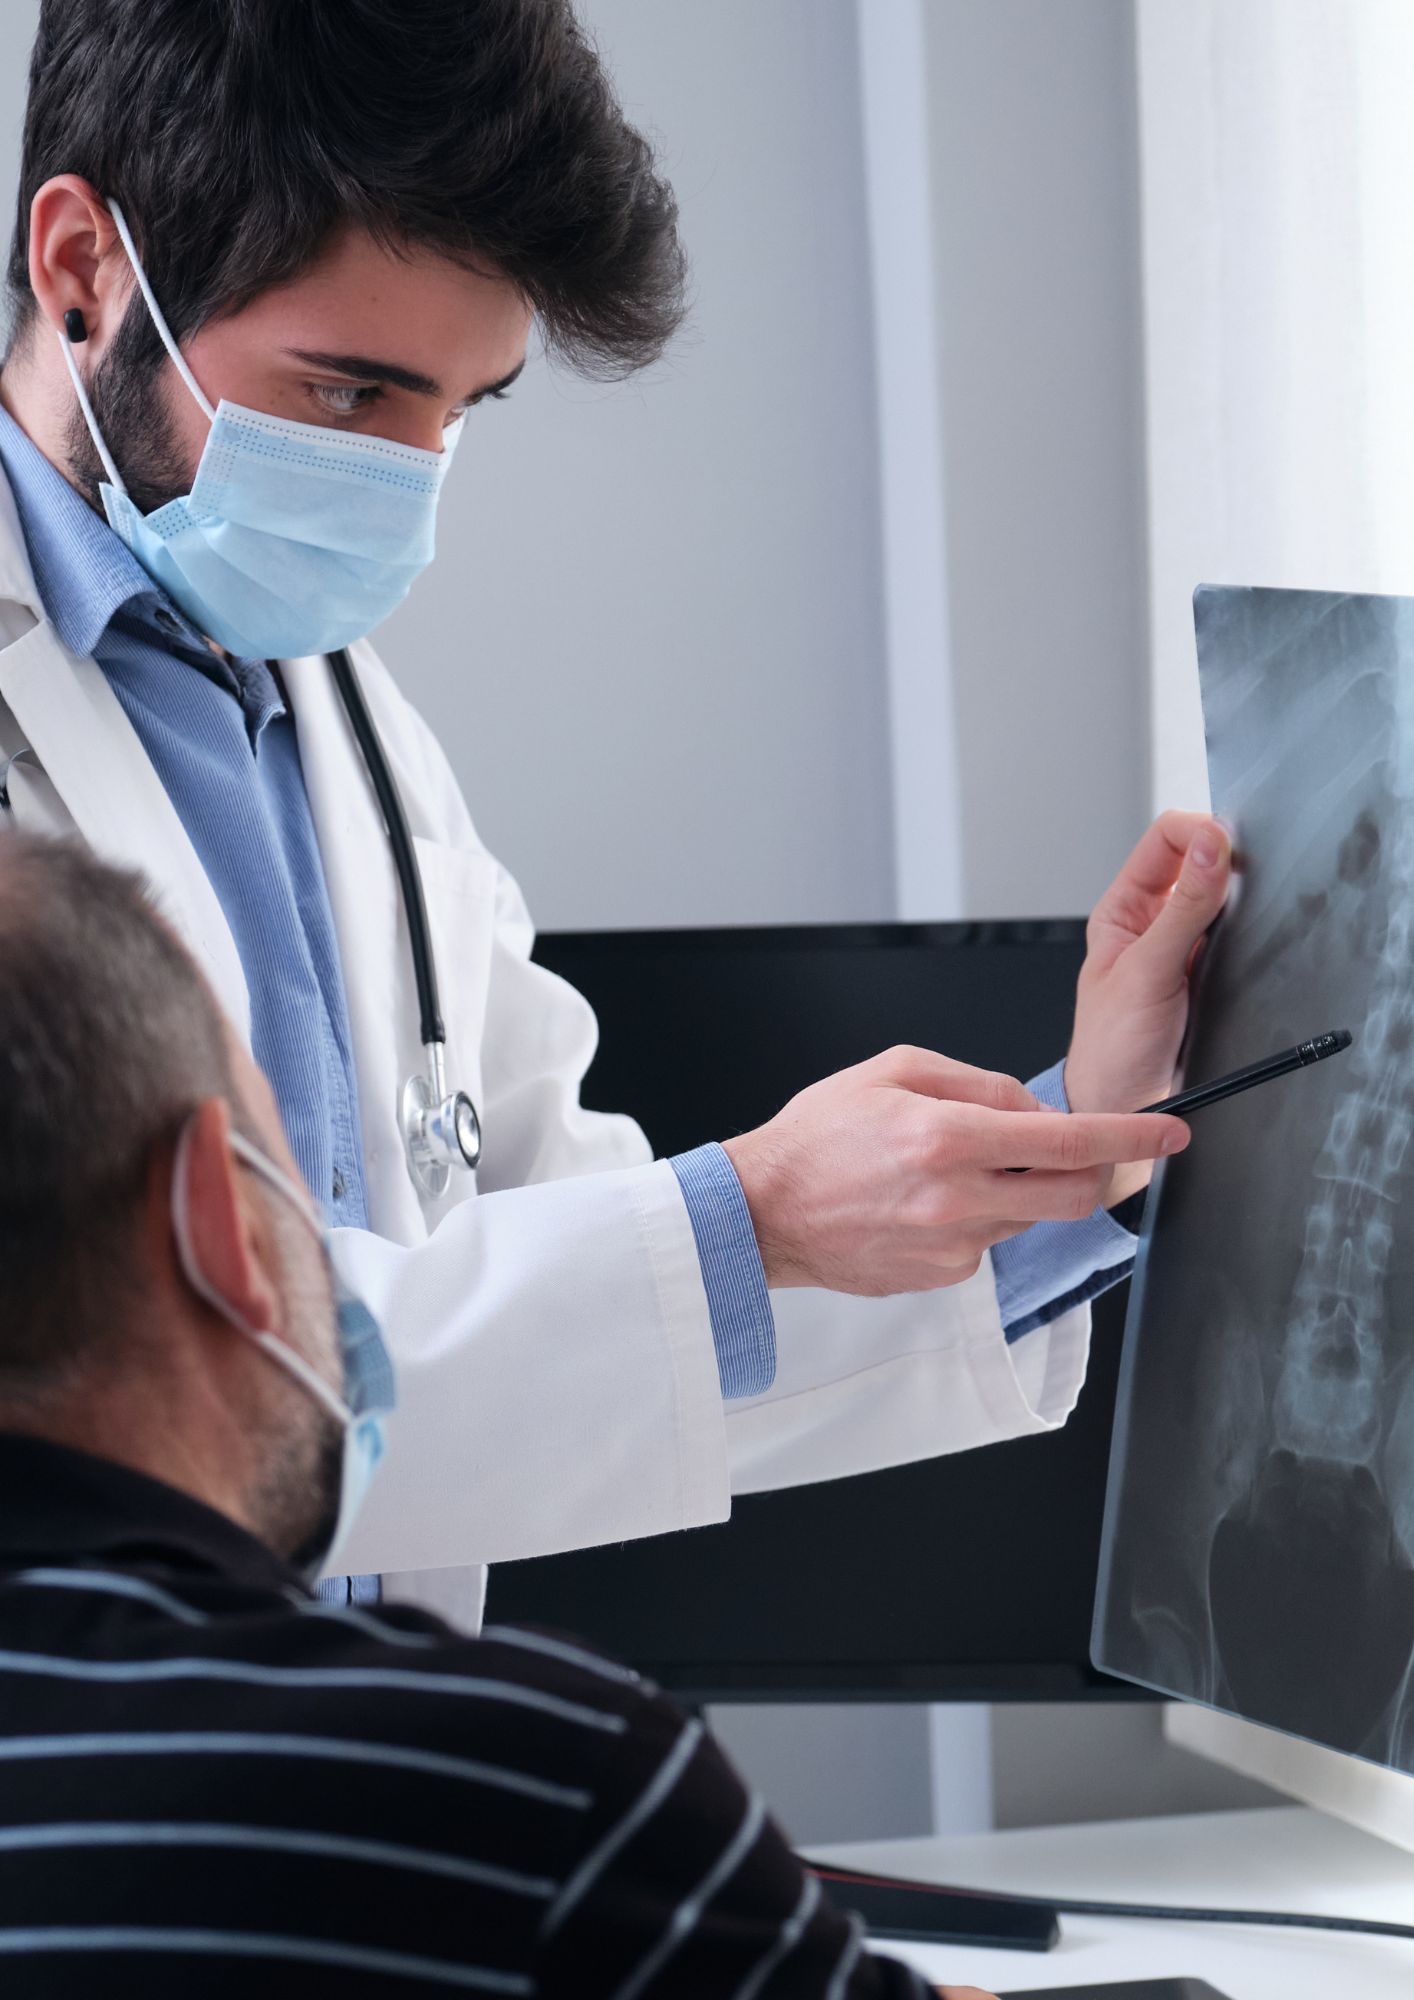 Why Should I Hire a Spinal Cord Injury Lawyer?